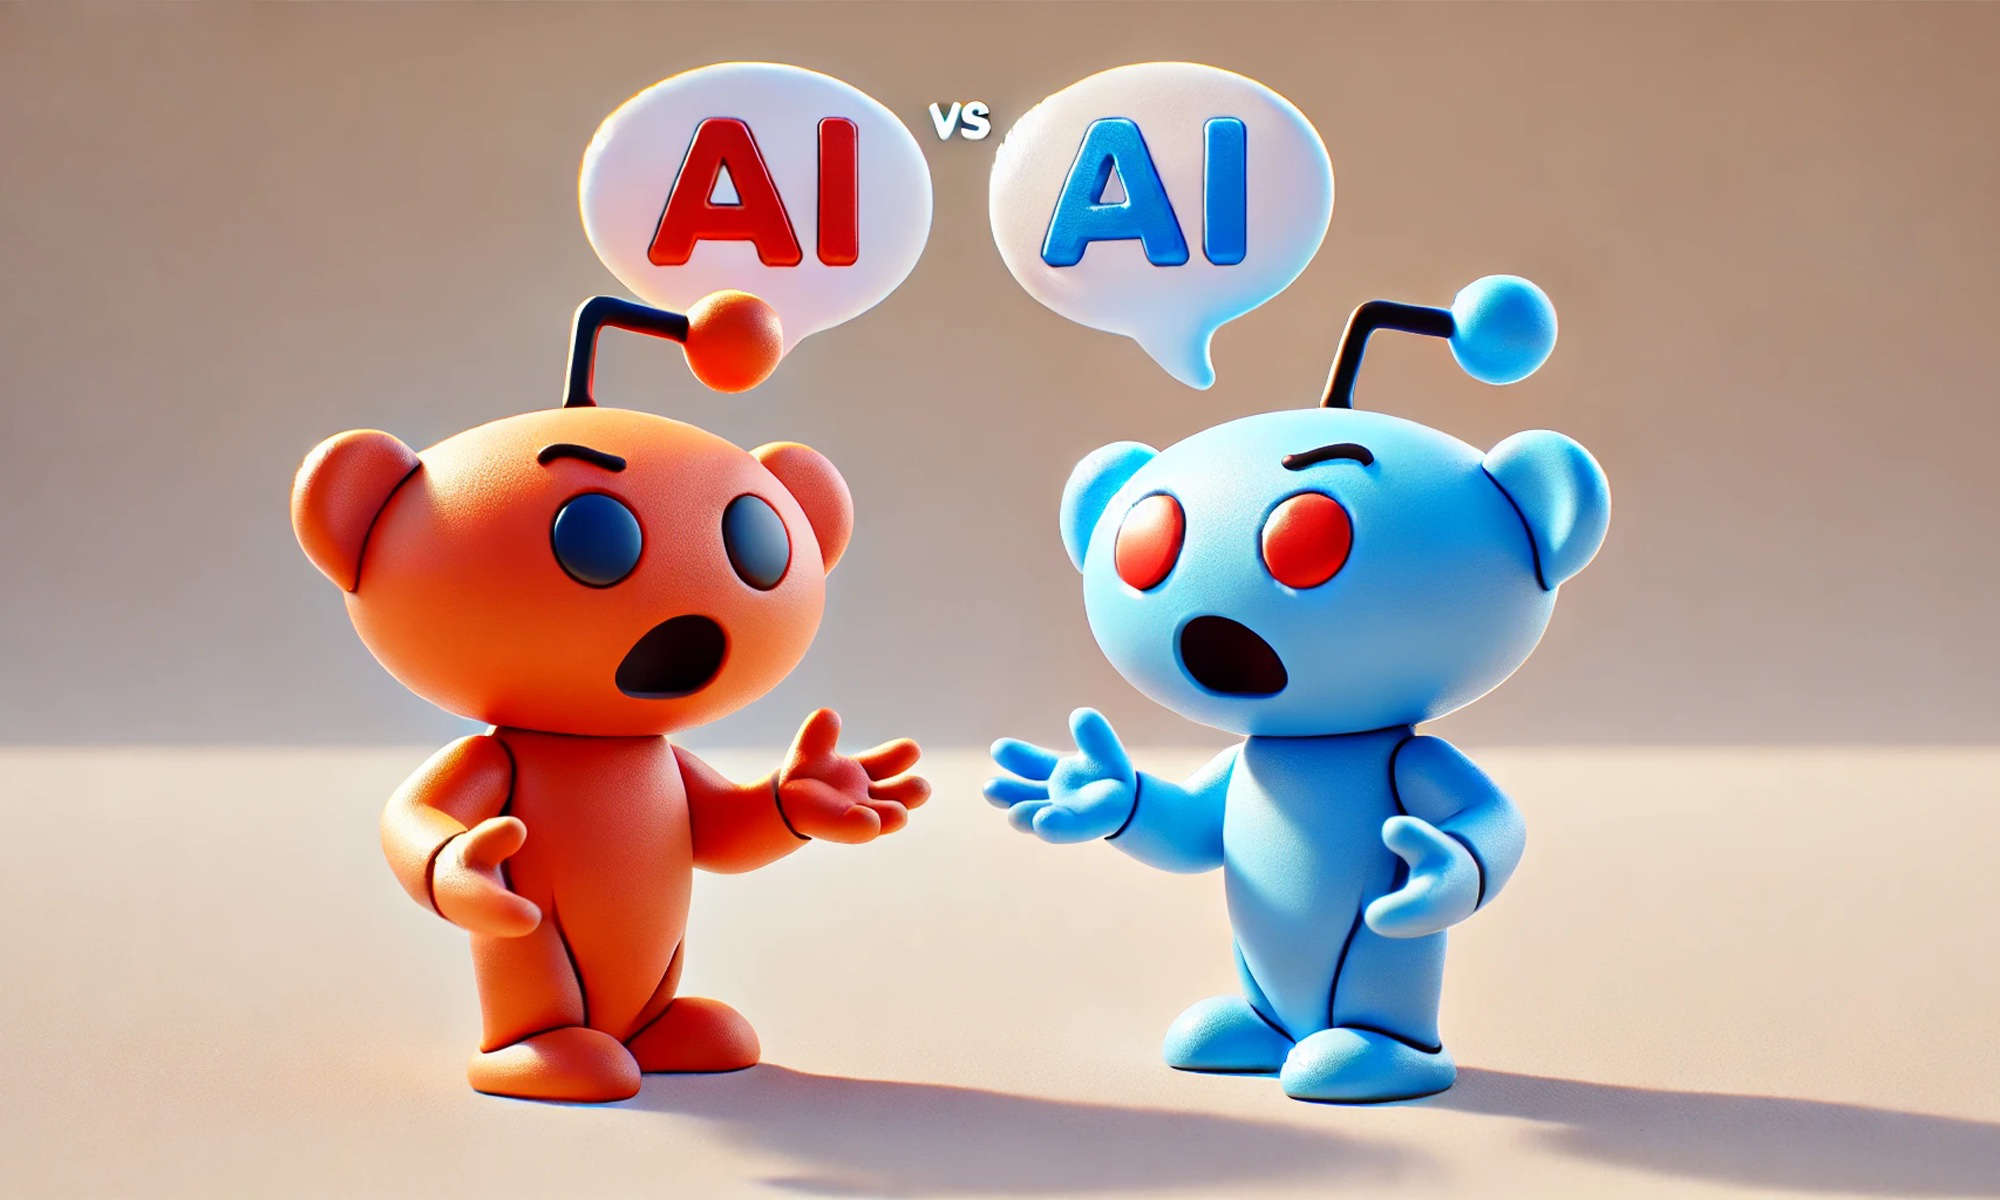 AI-generated image of two Reddit mascots, one red, one blue, arguing about artificial intelligence.